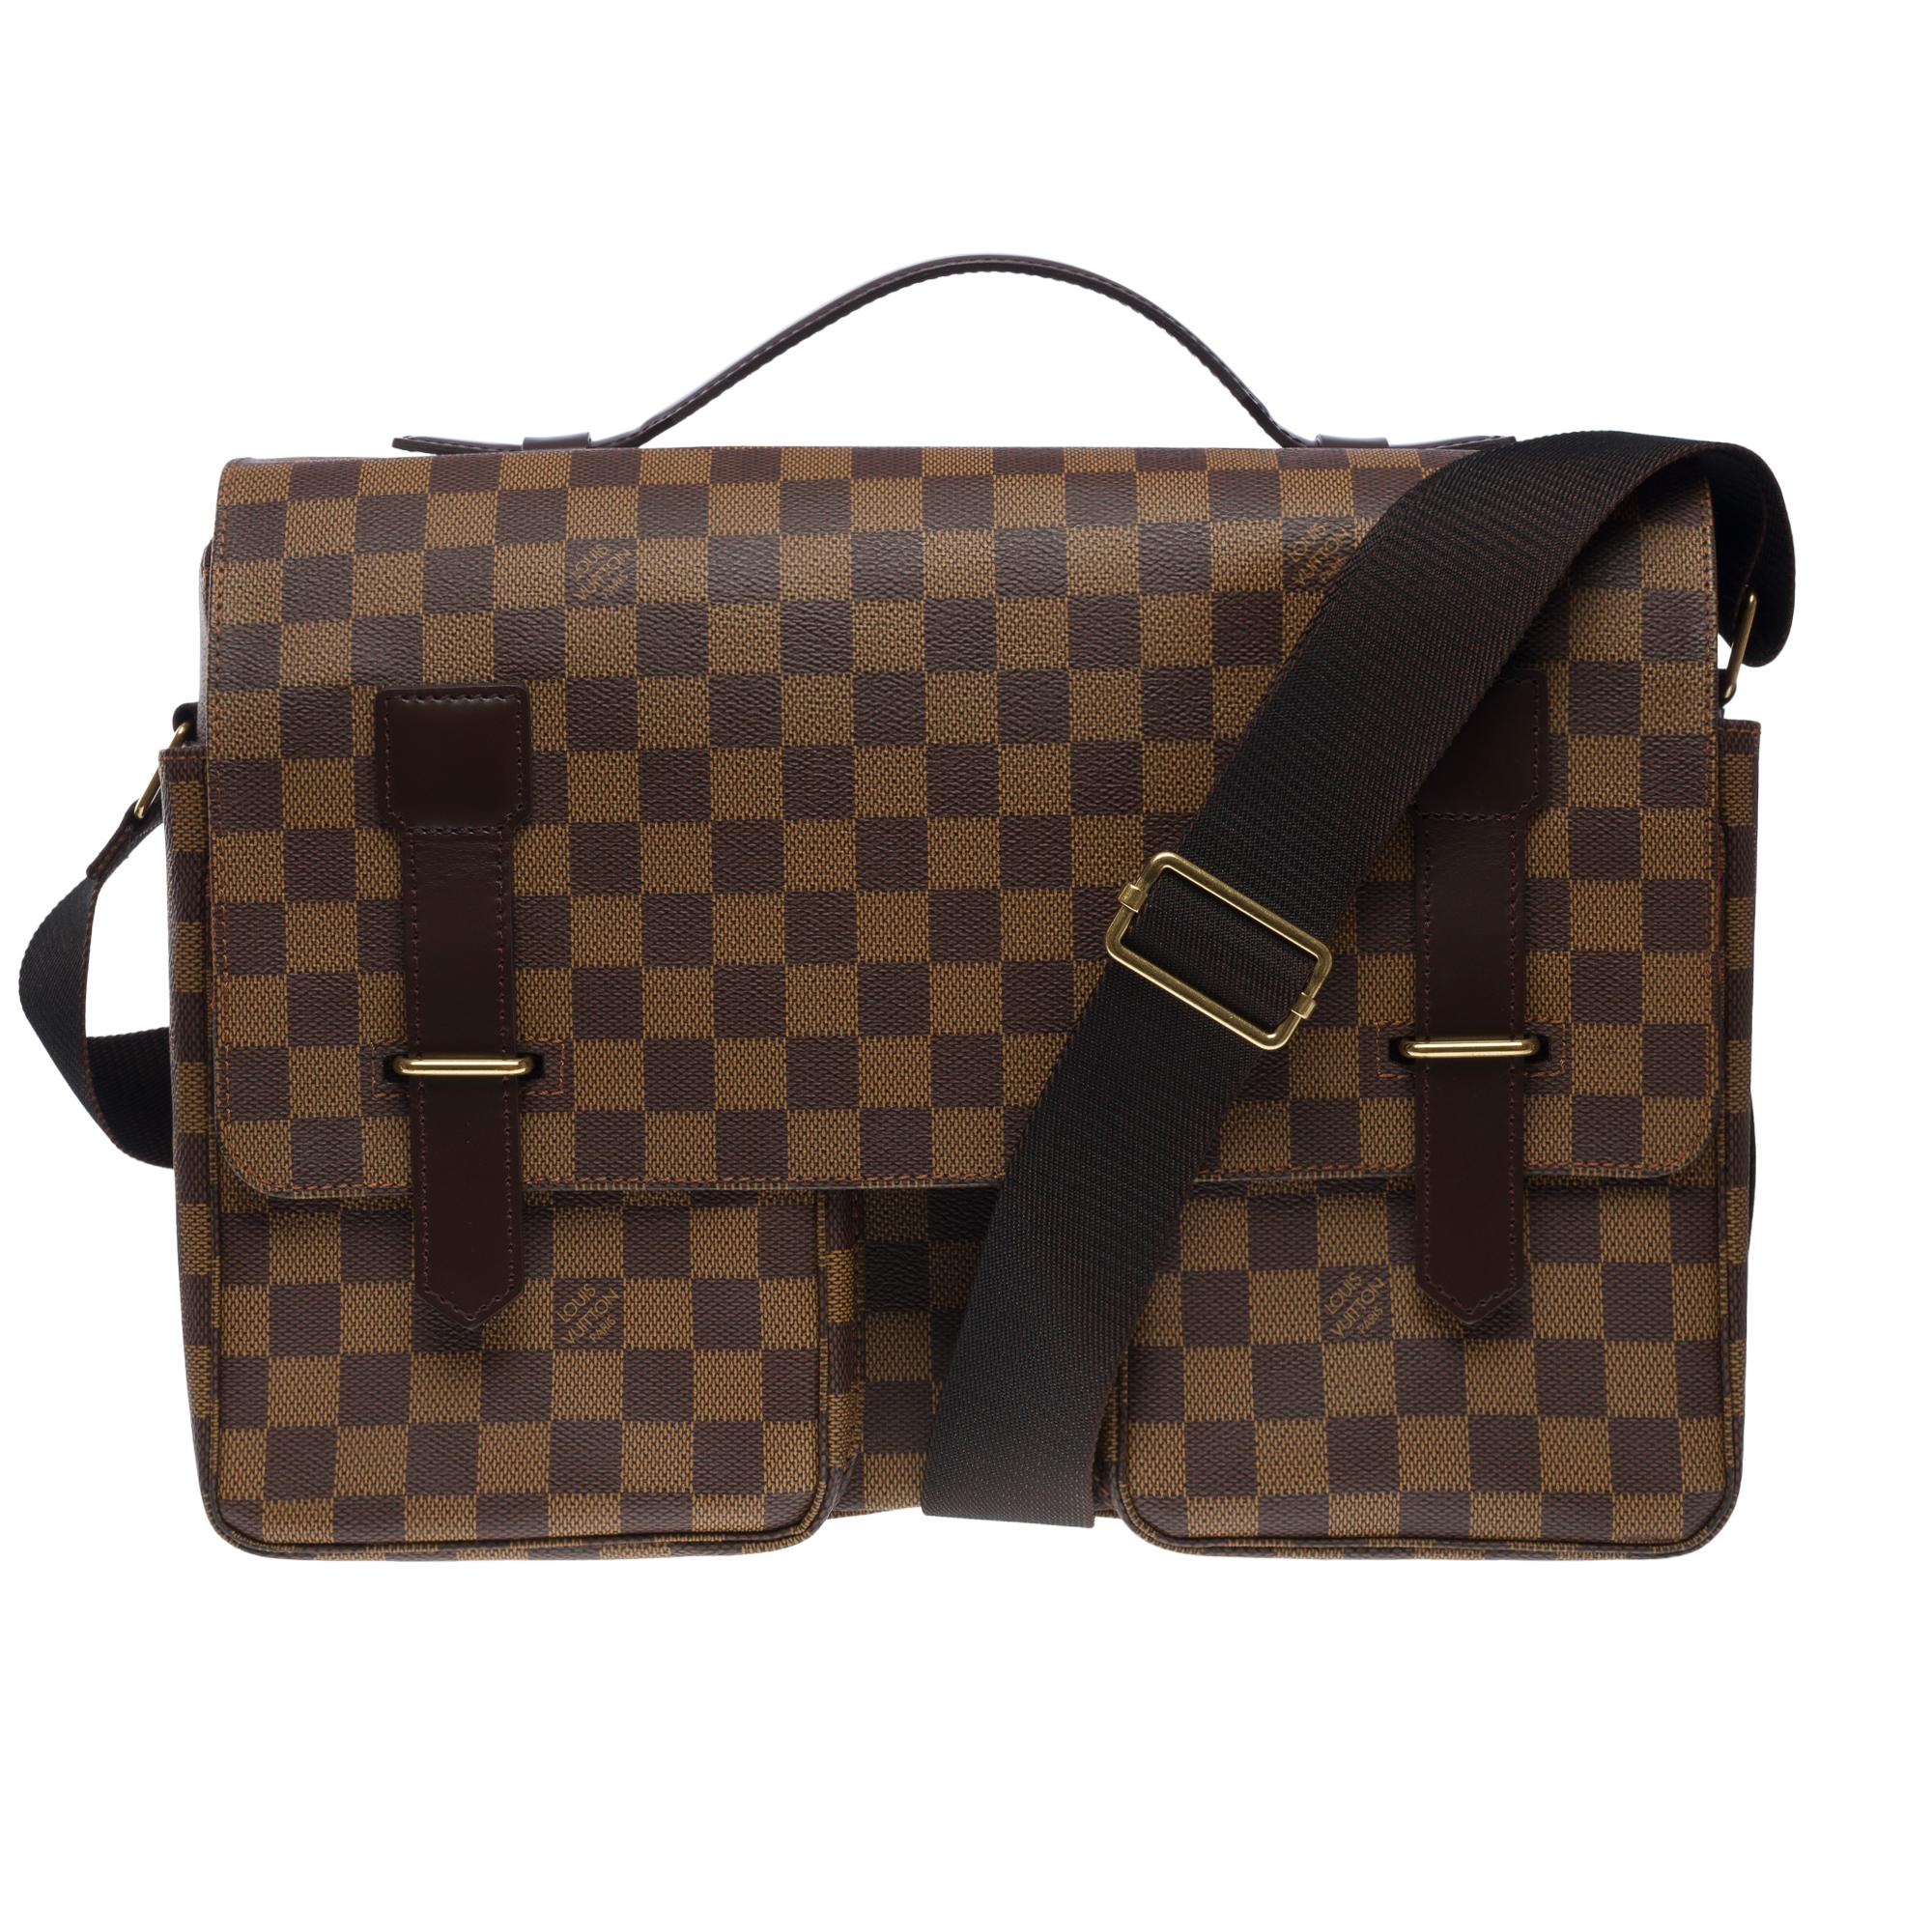 Elegant​ ​Louis​ ​Vuitton​ ​Broadway​ ​Messenger​ ​crossbody​ ​bag​ ​in​ ​brown​ ​coated​ ​checkered​ ​canvas​ ​and​ ​brown​ ​leather,​ ​golden​ ​metal​ ​trim,​ ​simple​ ​brown​ ​leather​ ​handle,​ ​an​ ​adjustable​ ​brown​ ​canvas​ ​handle​ ​for​